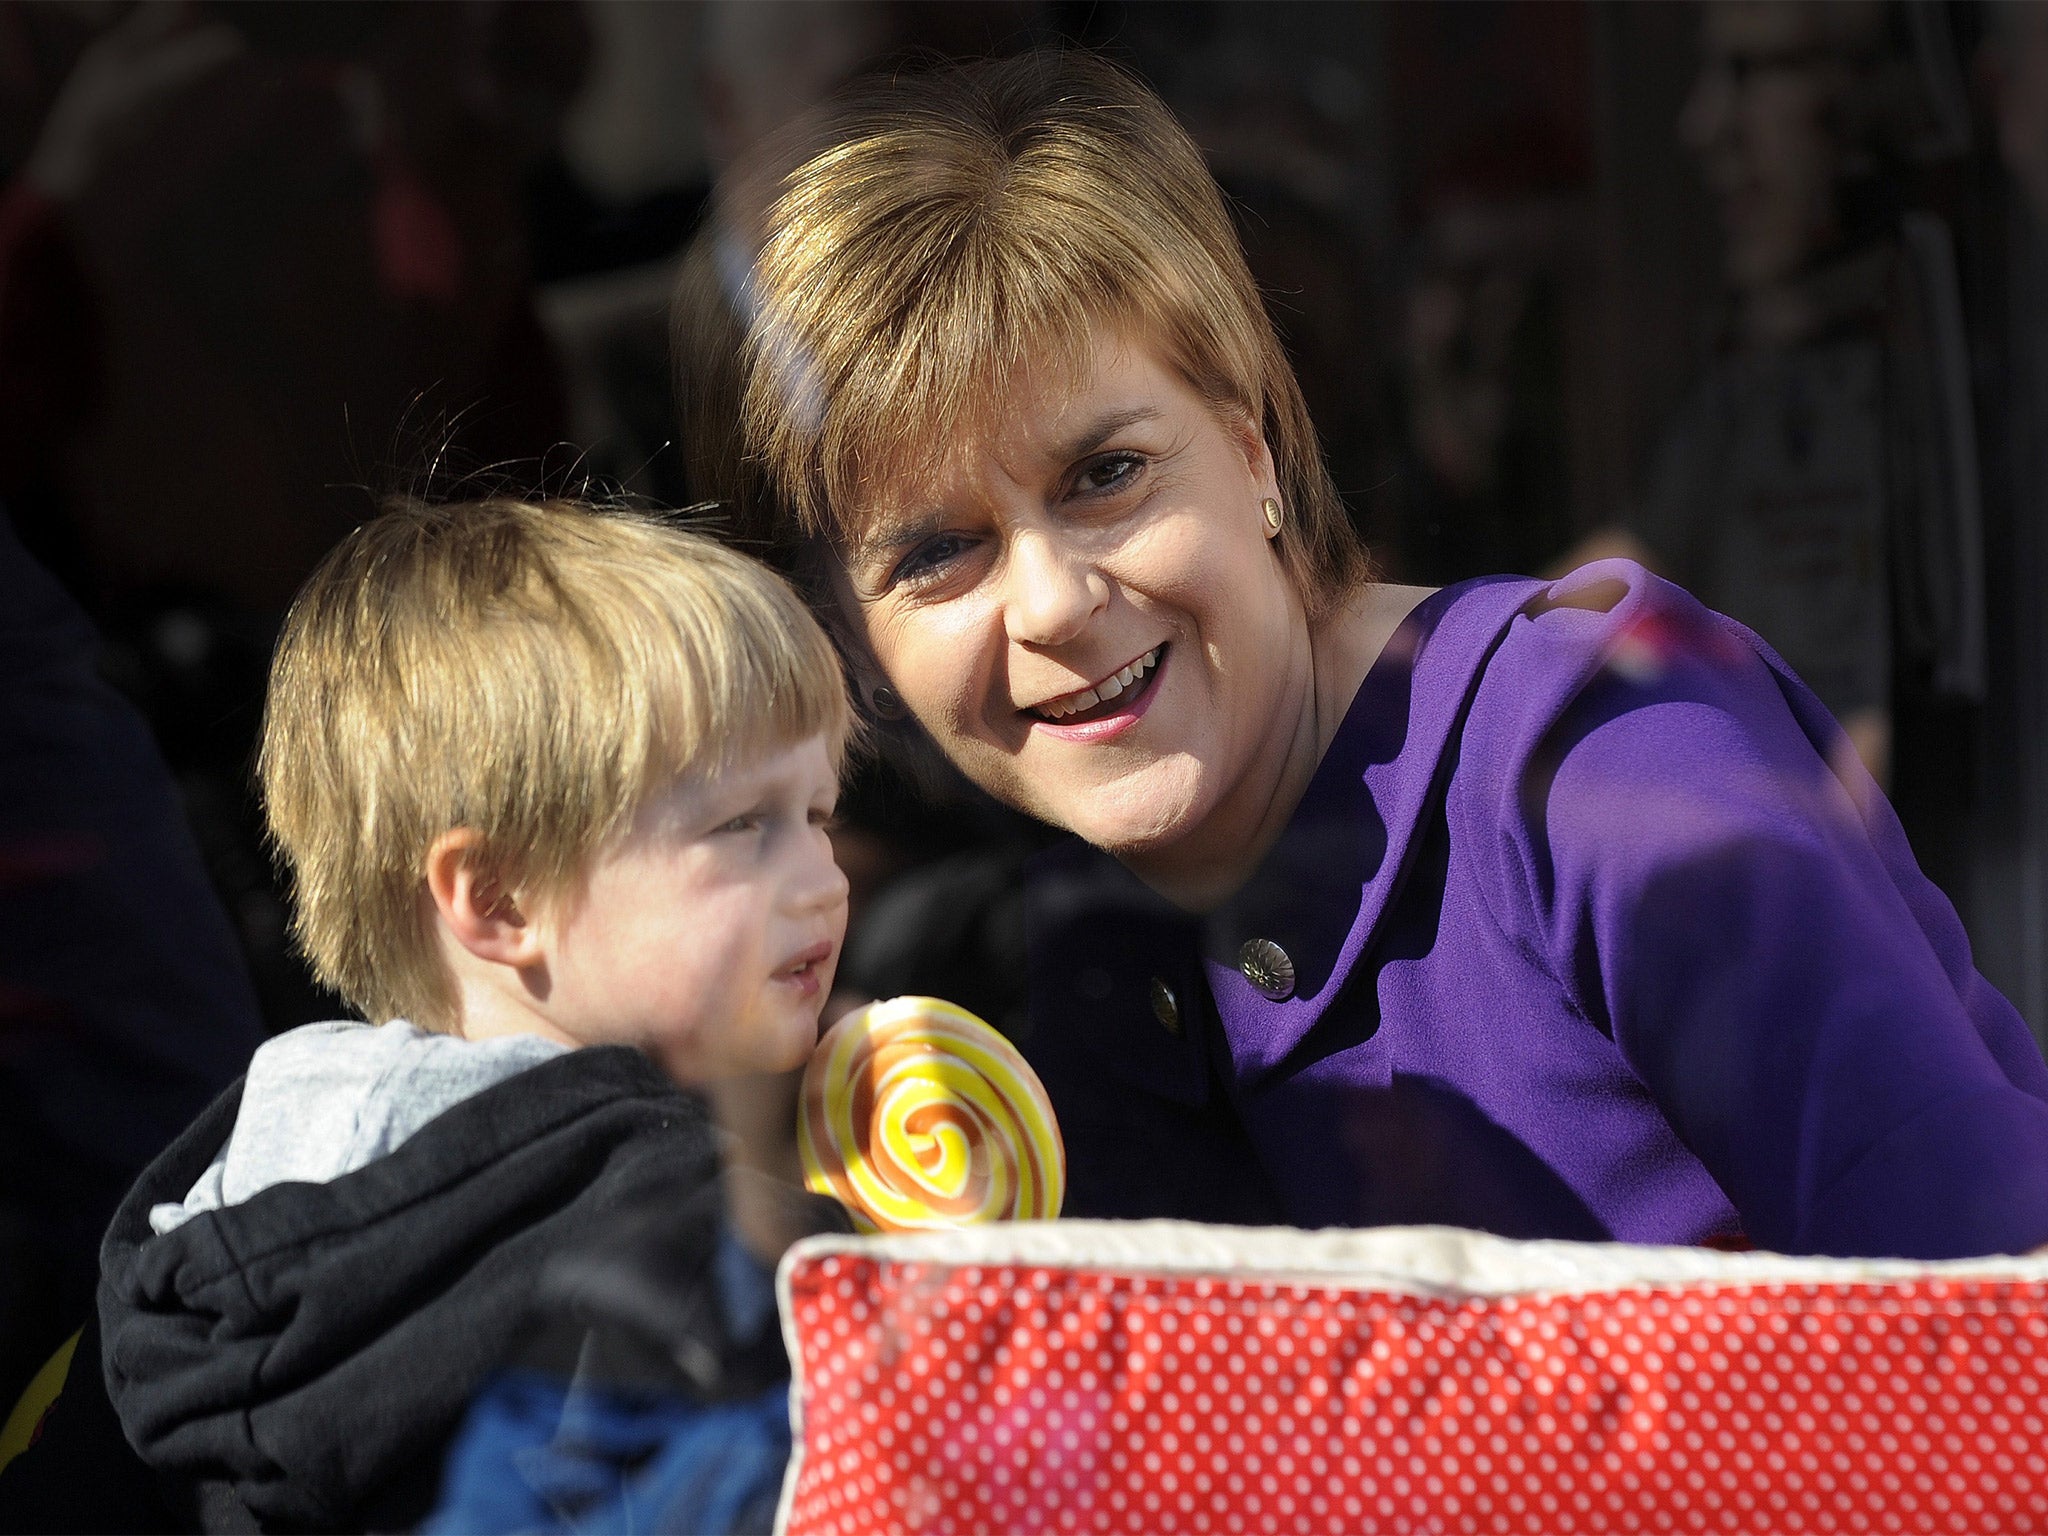 SNP leader Nicola Sturgeon campaigning in Edinburgh on Wednesday. The Tories are focusing on the threat of an SNP-Labour coalition (Getty)